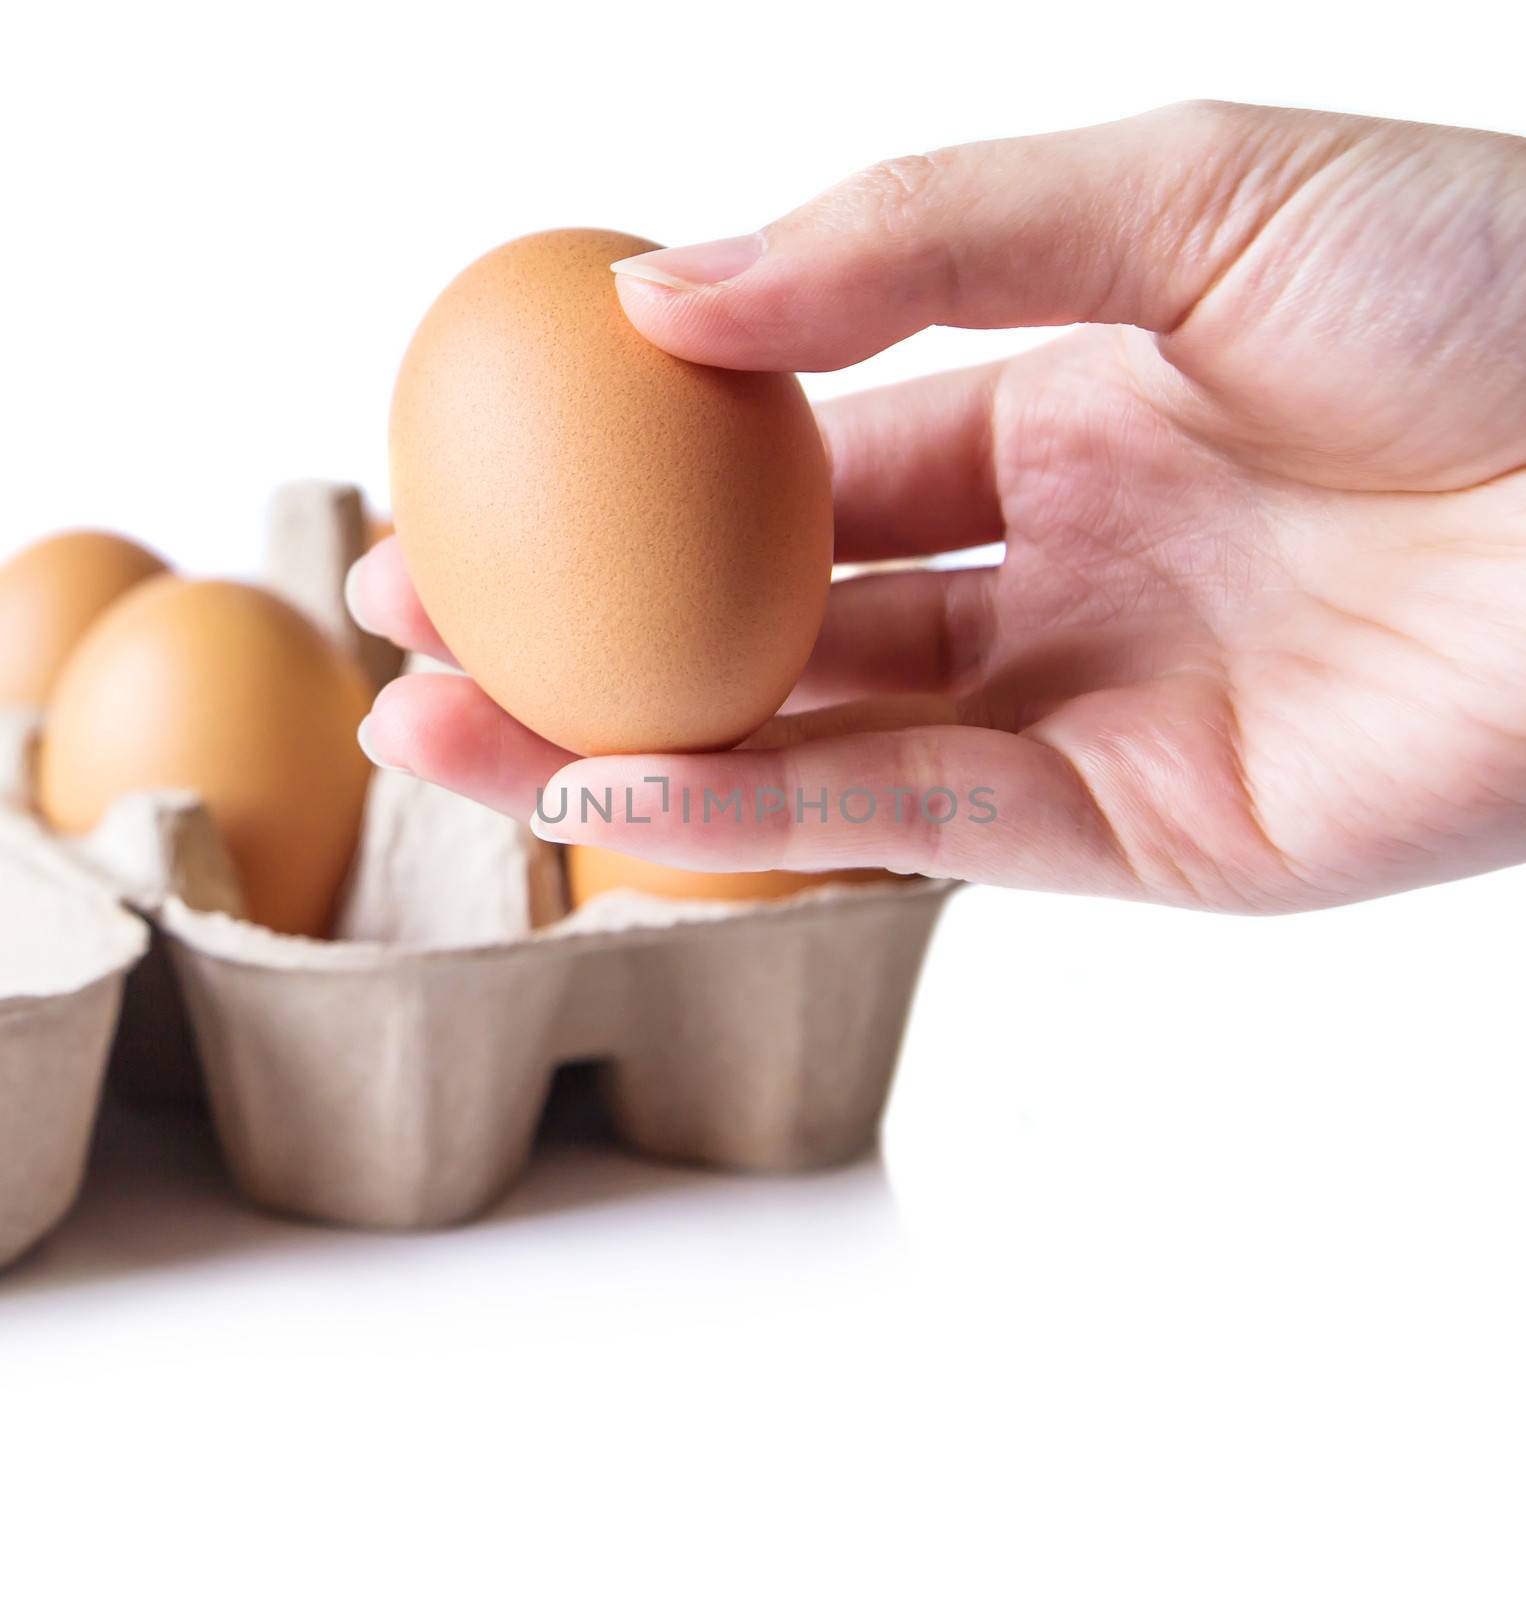 Woman hands with eggs on white background by Myimagine